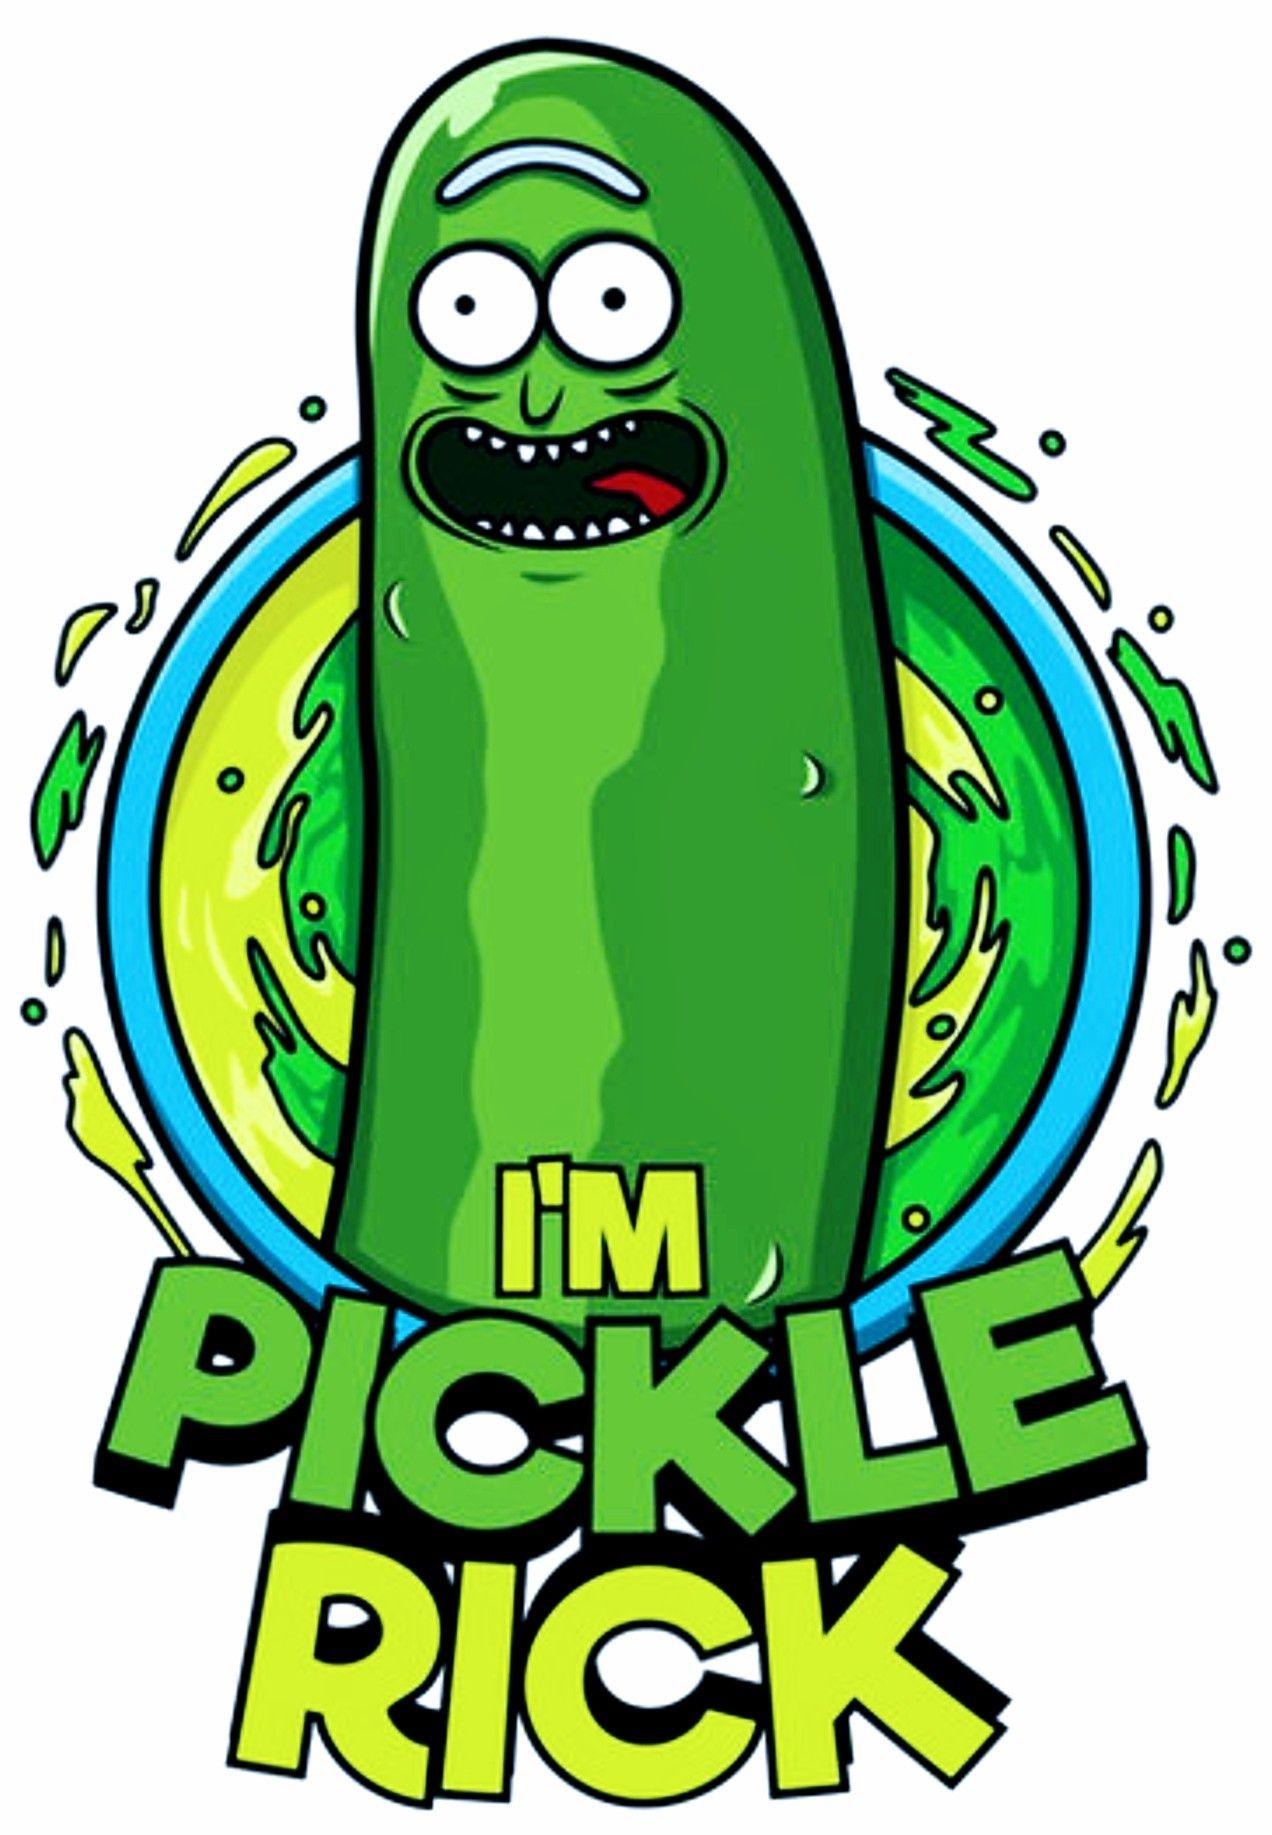 Featured image of post Pickle Rick Wallpaper Iphone Abstract art iphone wallpaper avec fresque murale tarif unique wallpaper rick and morty cartoon network iphone best iphone post by rick sanchez